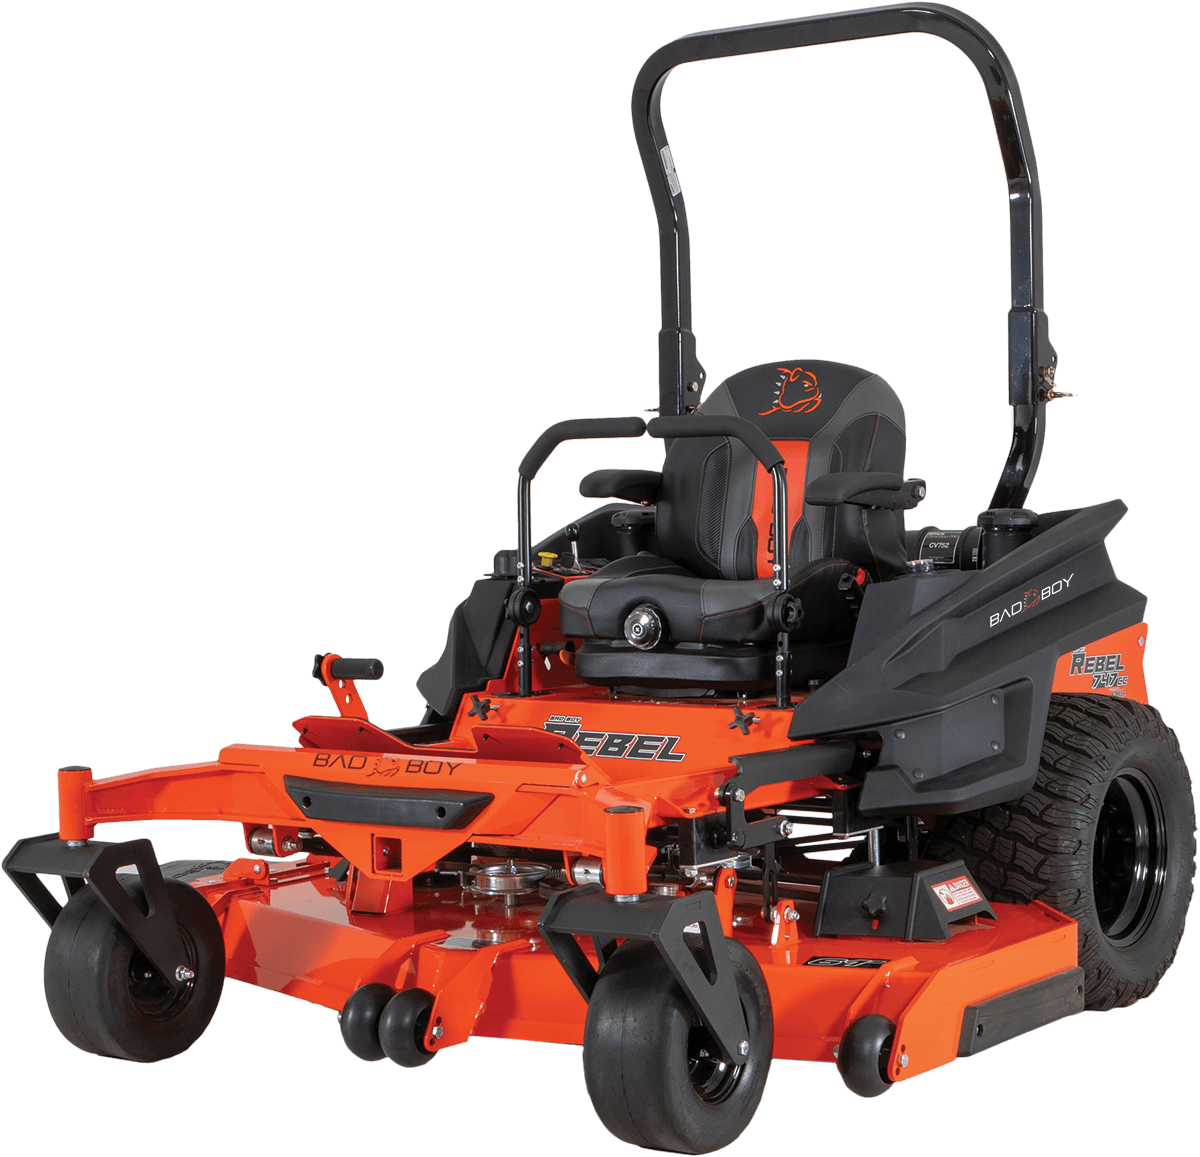 How to get lawn mower warranty service